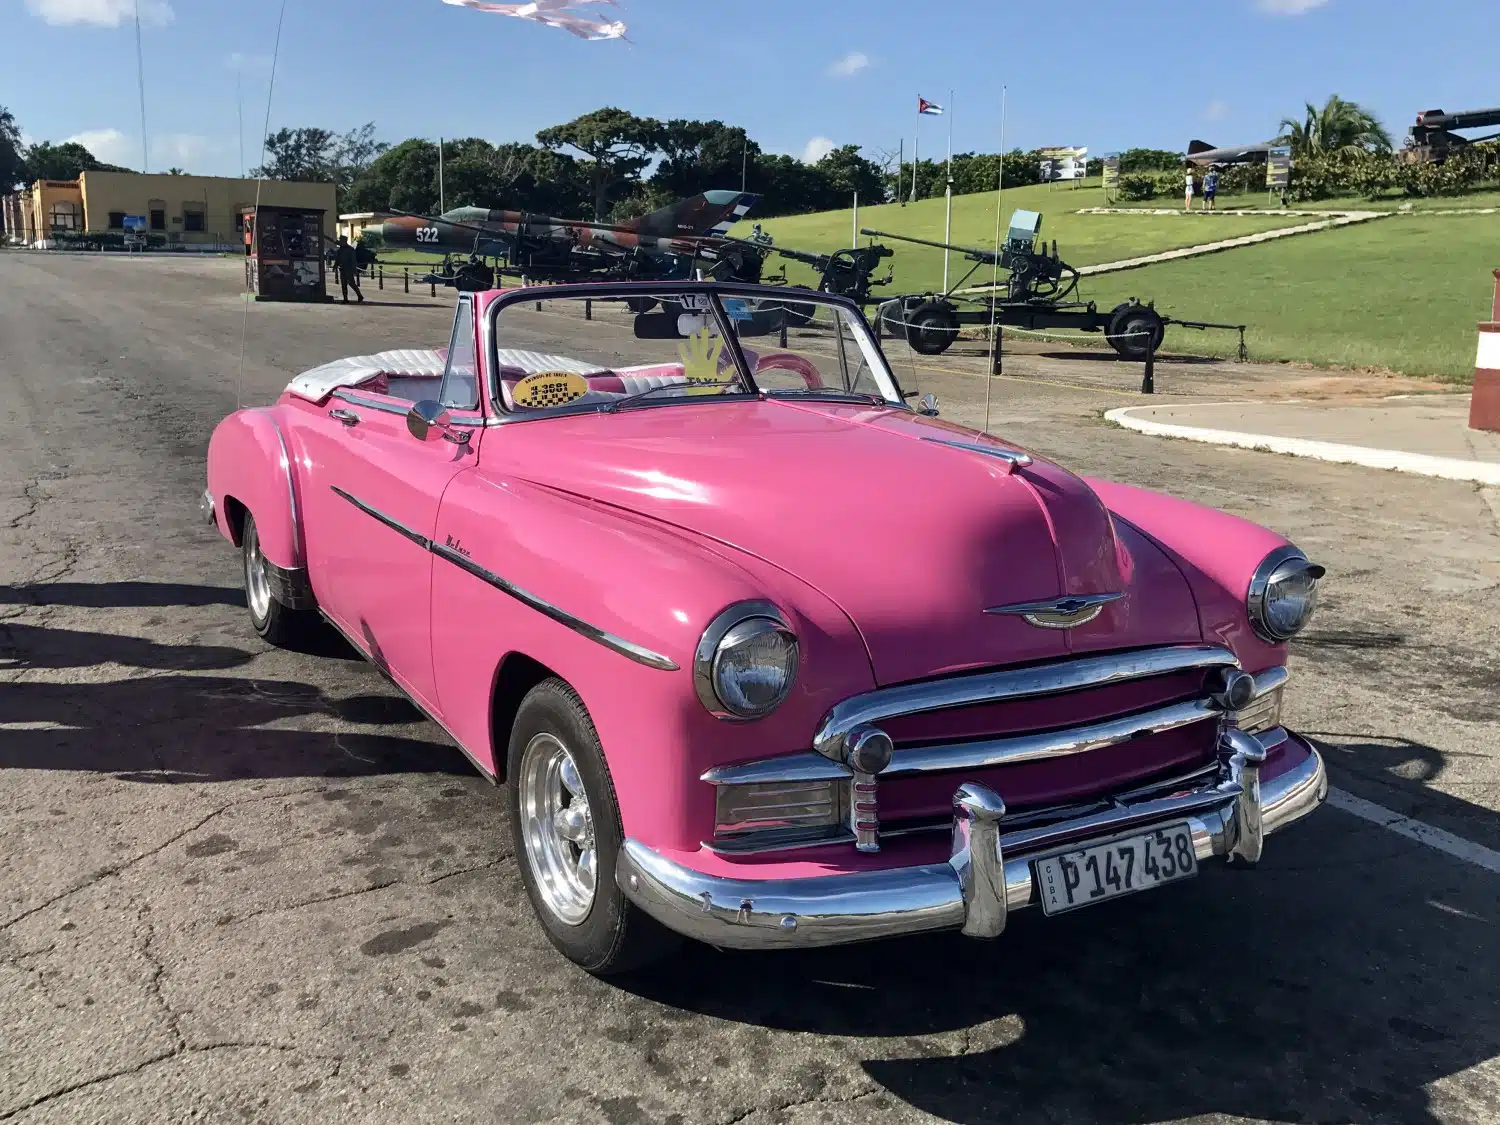 You can't go to Havana without taking a car tour in a classic car. Read our guide to the best things to do in Havana